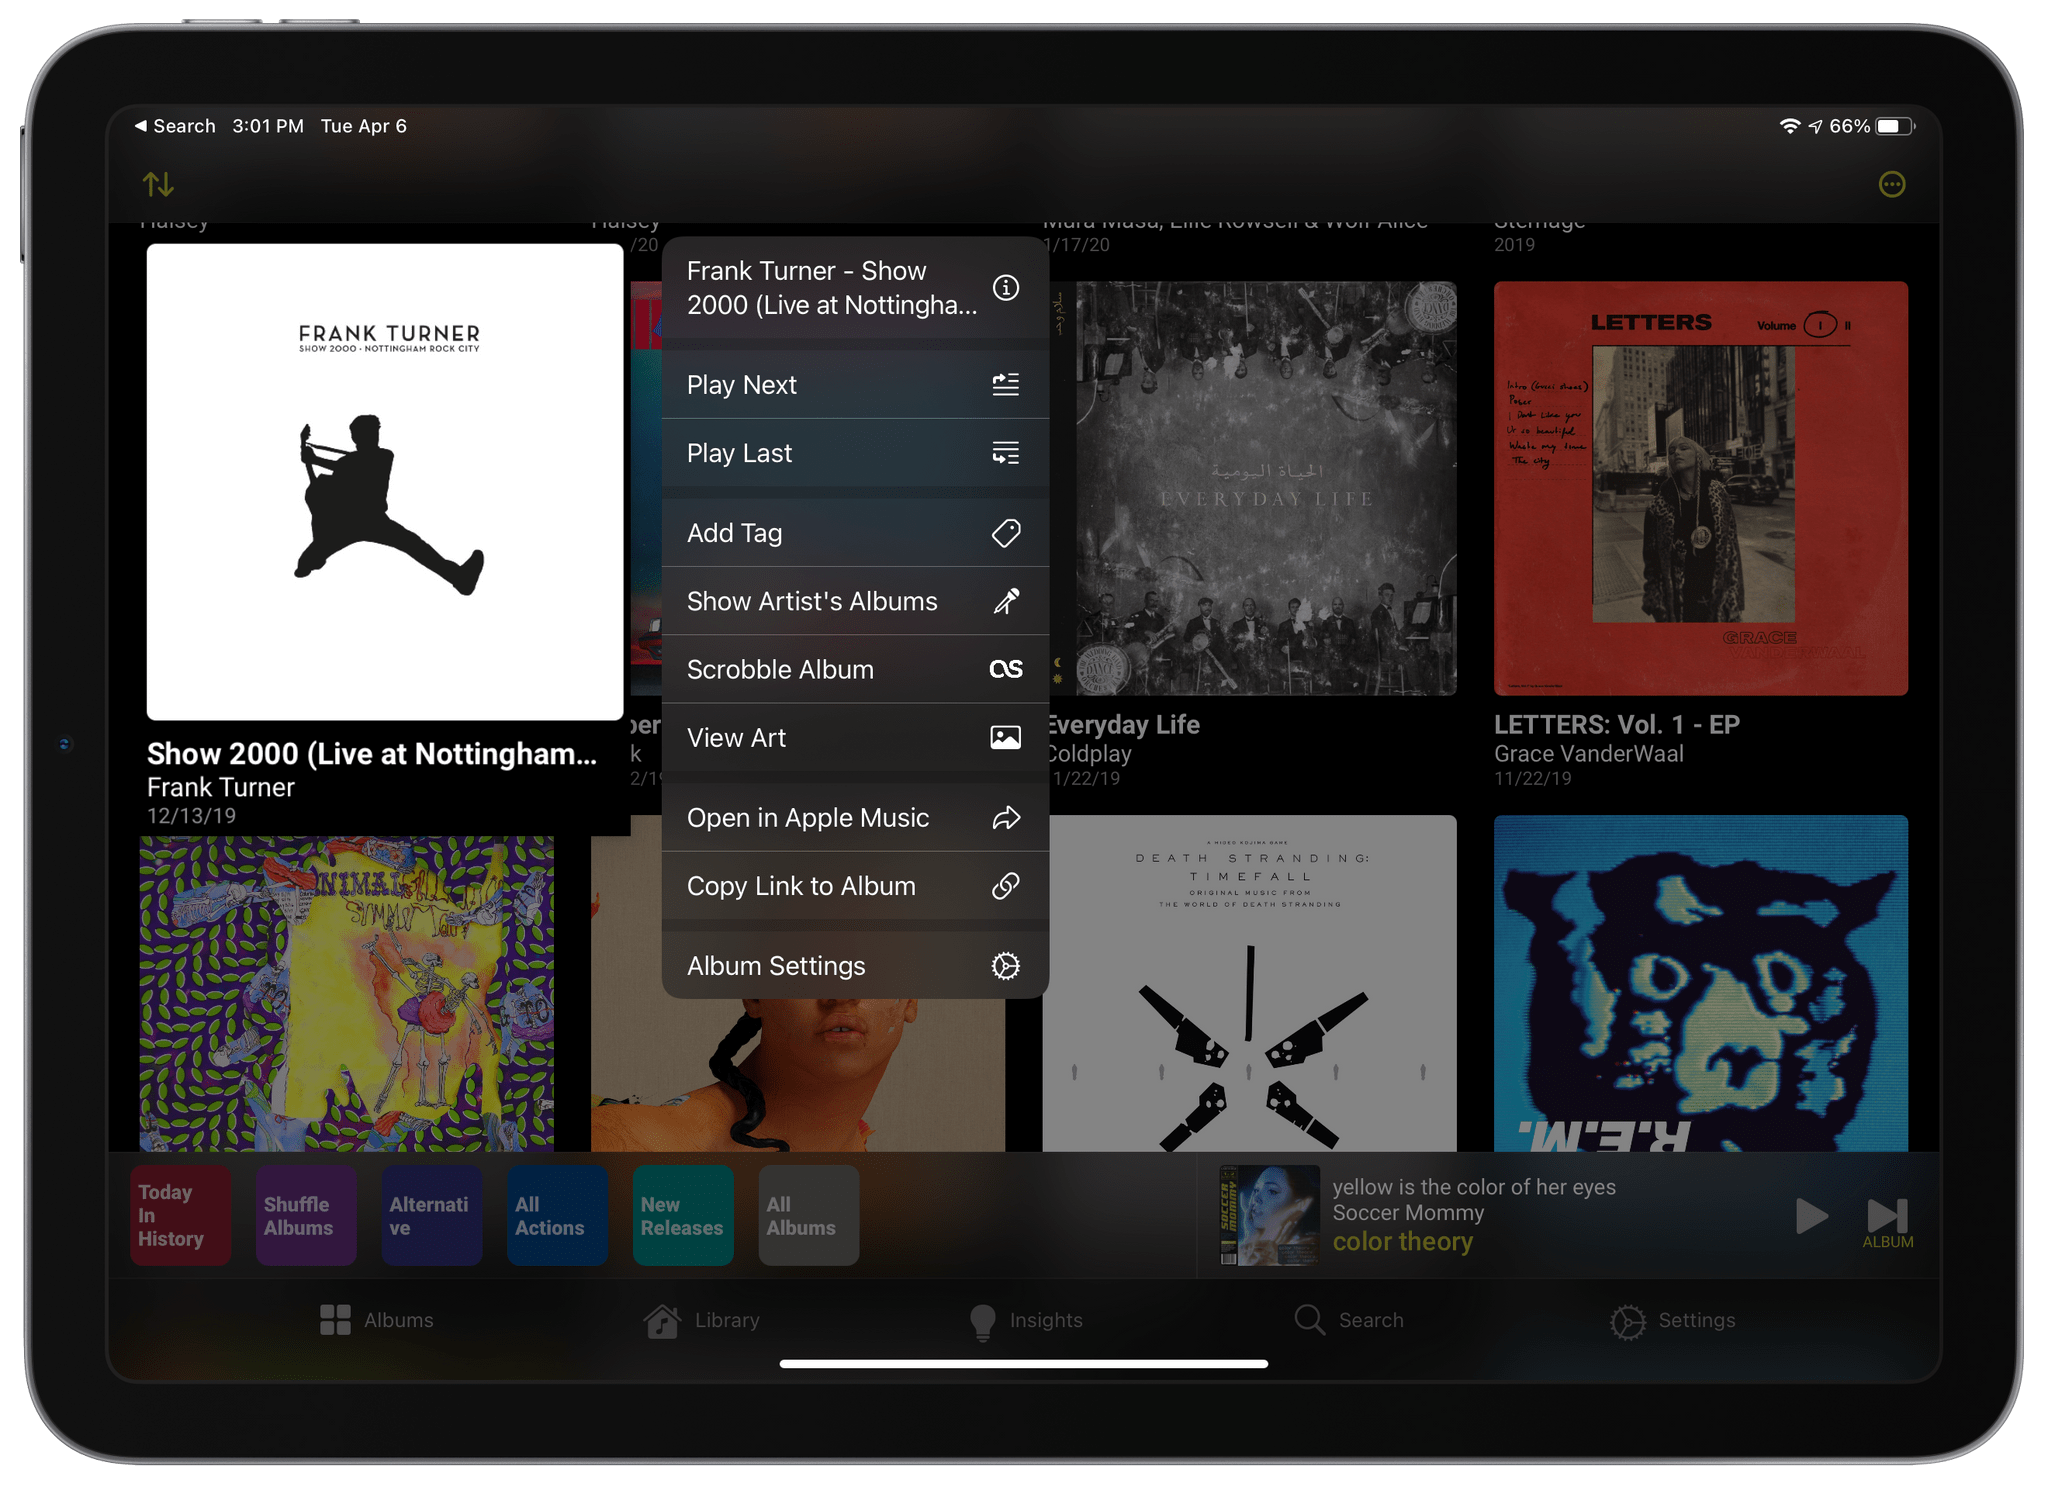 Albums leverages context menus to make sure power-user features are always available.